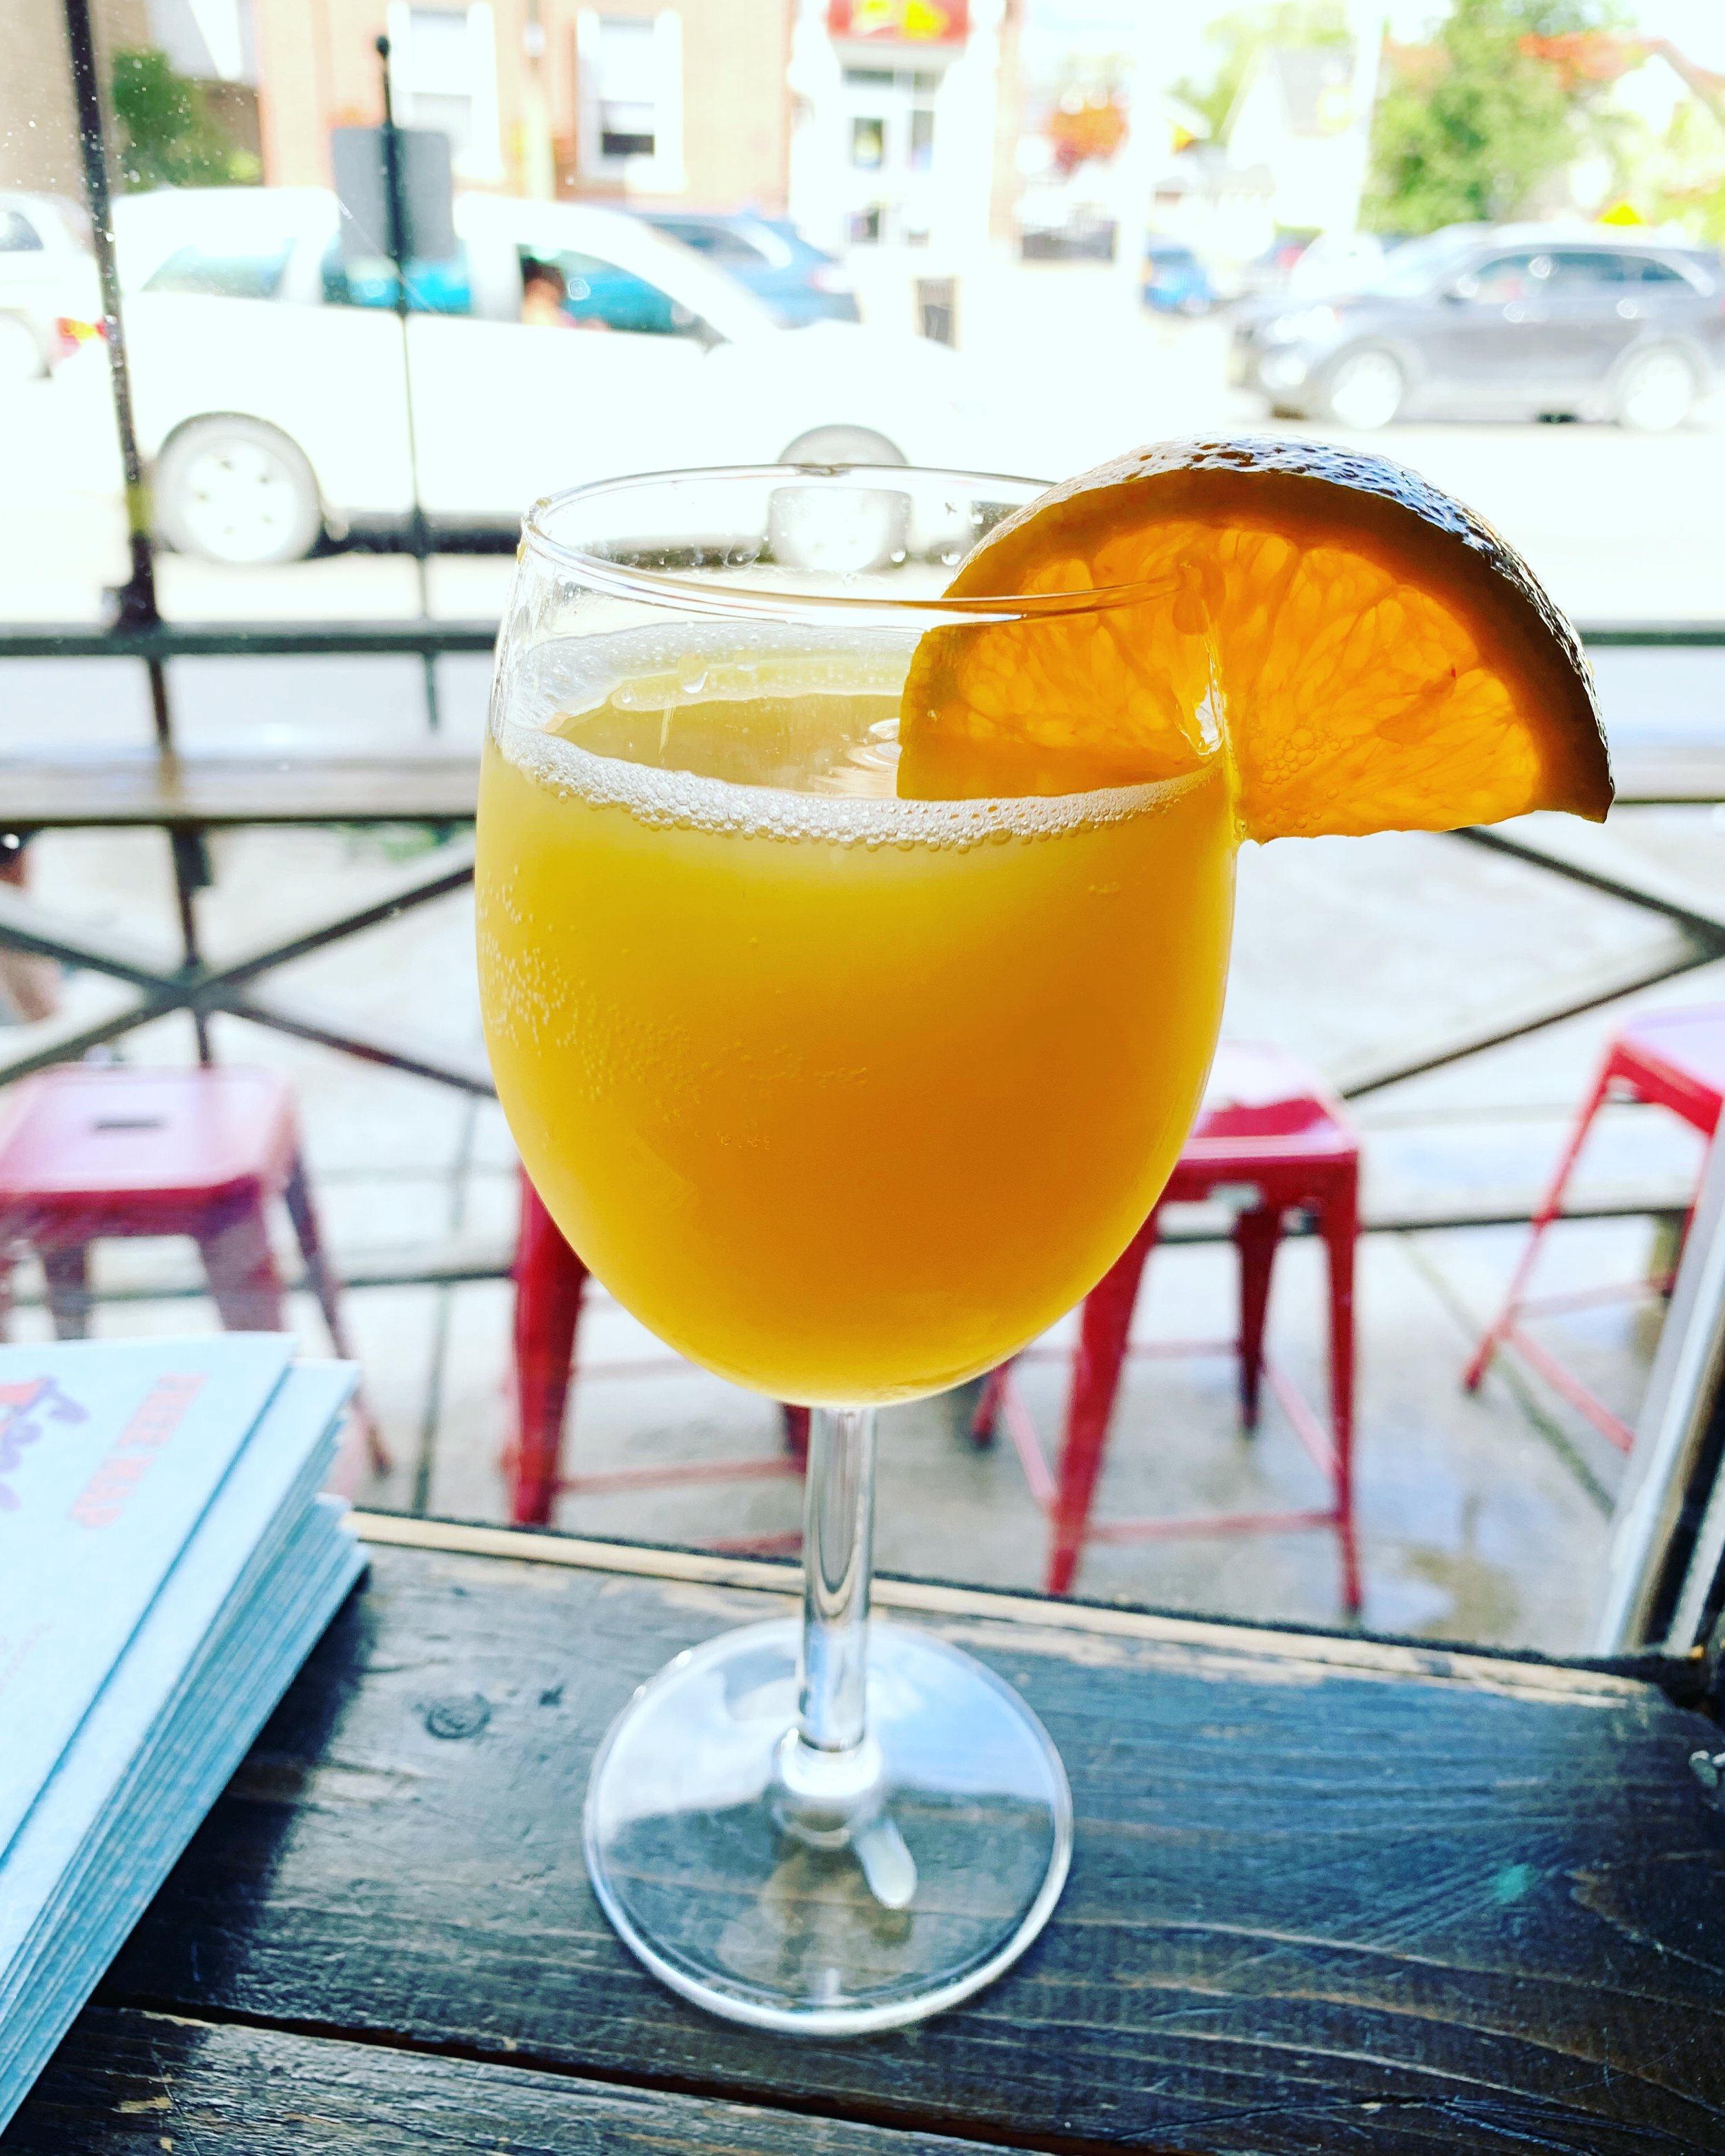 Mimosa’s on a long weekend are a MUST!